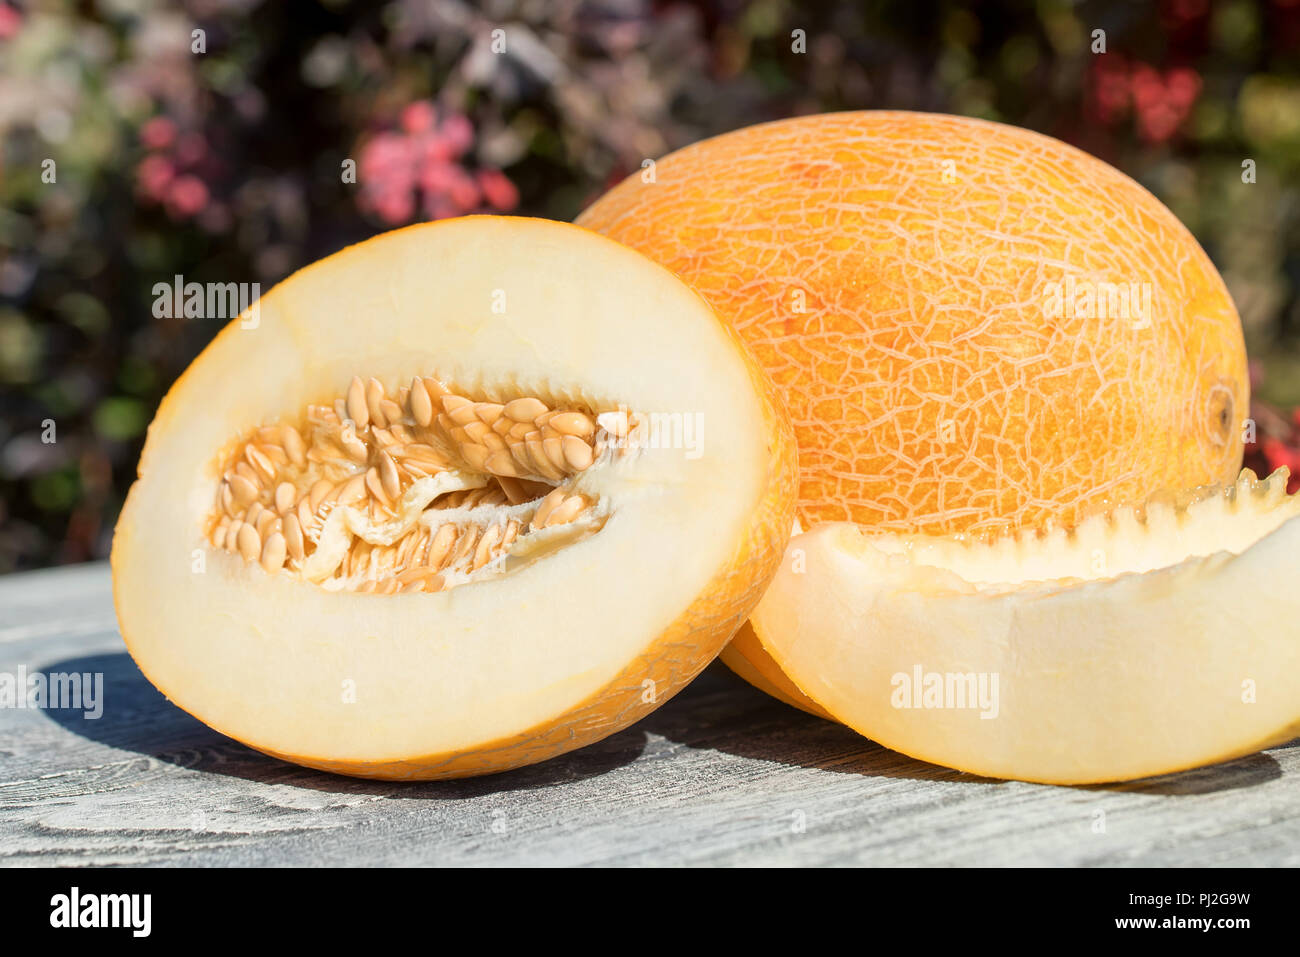 Whole and sliced melon on wooden table outdoors Stock Photo